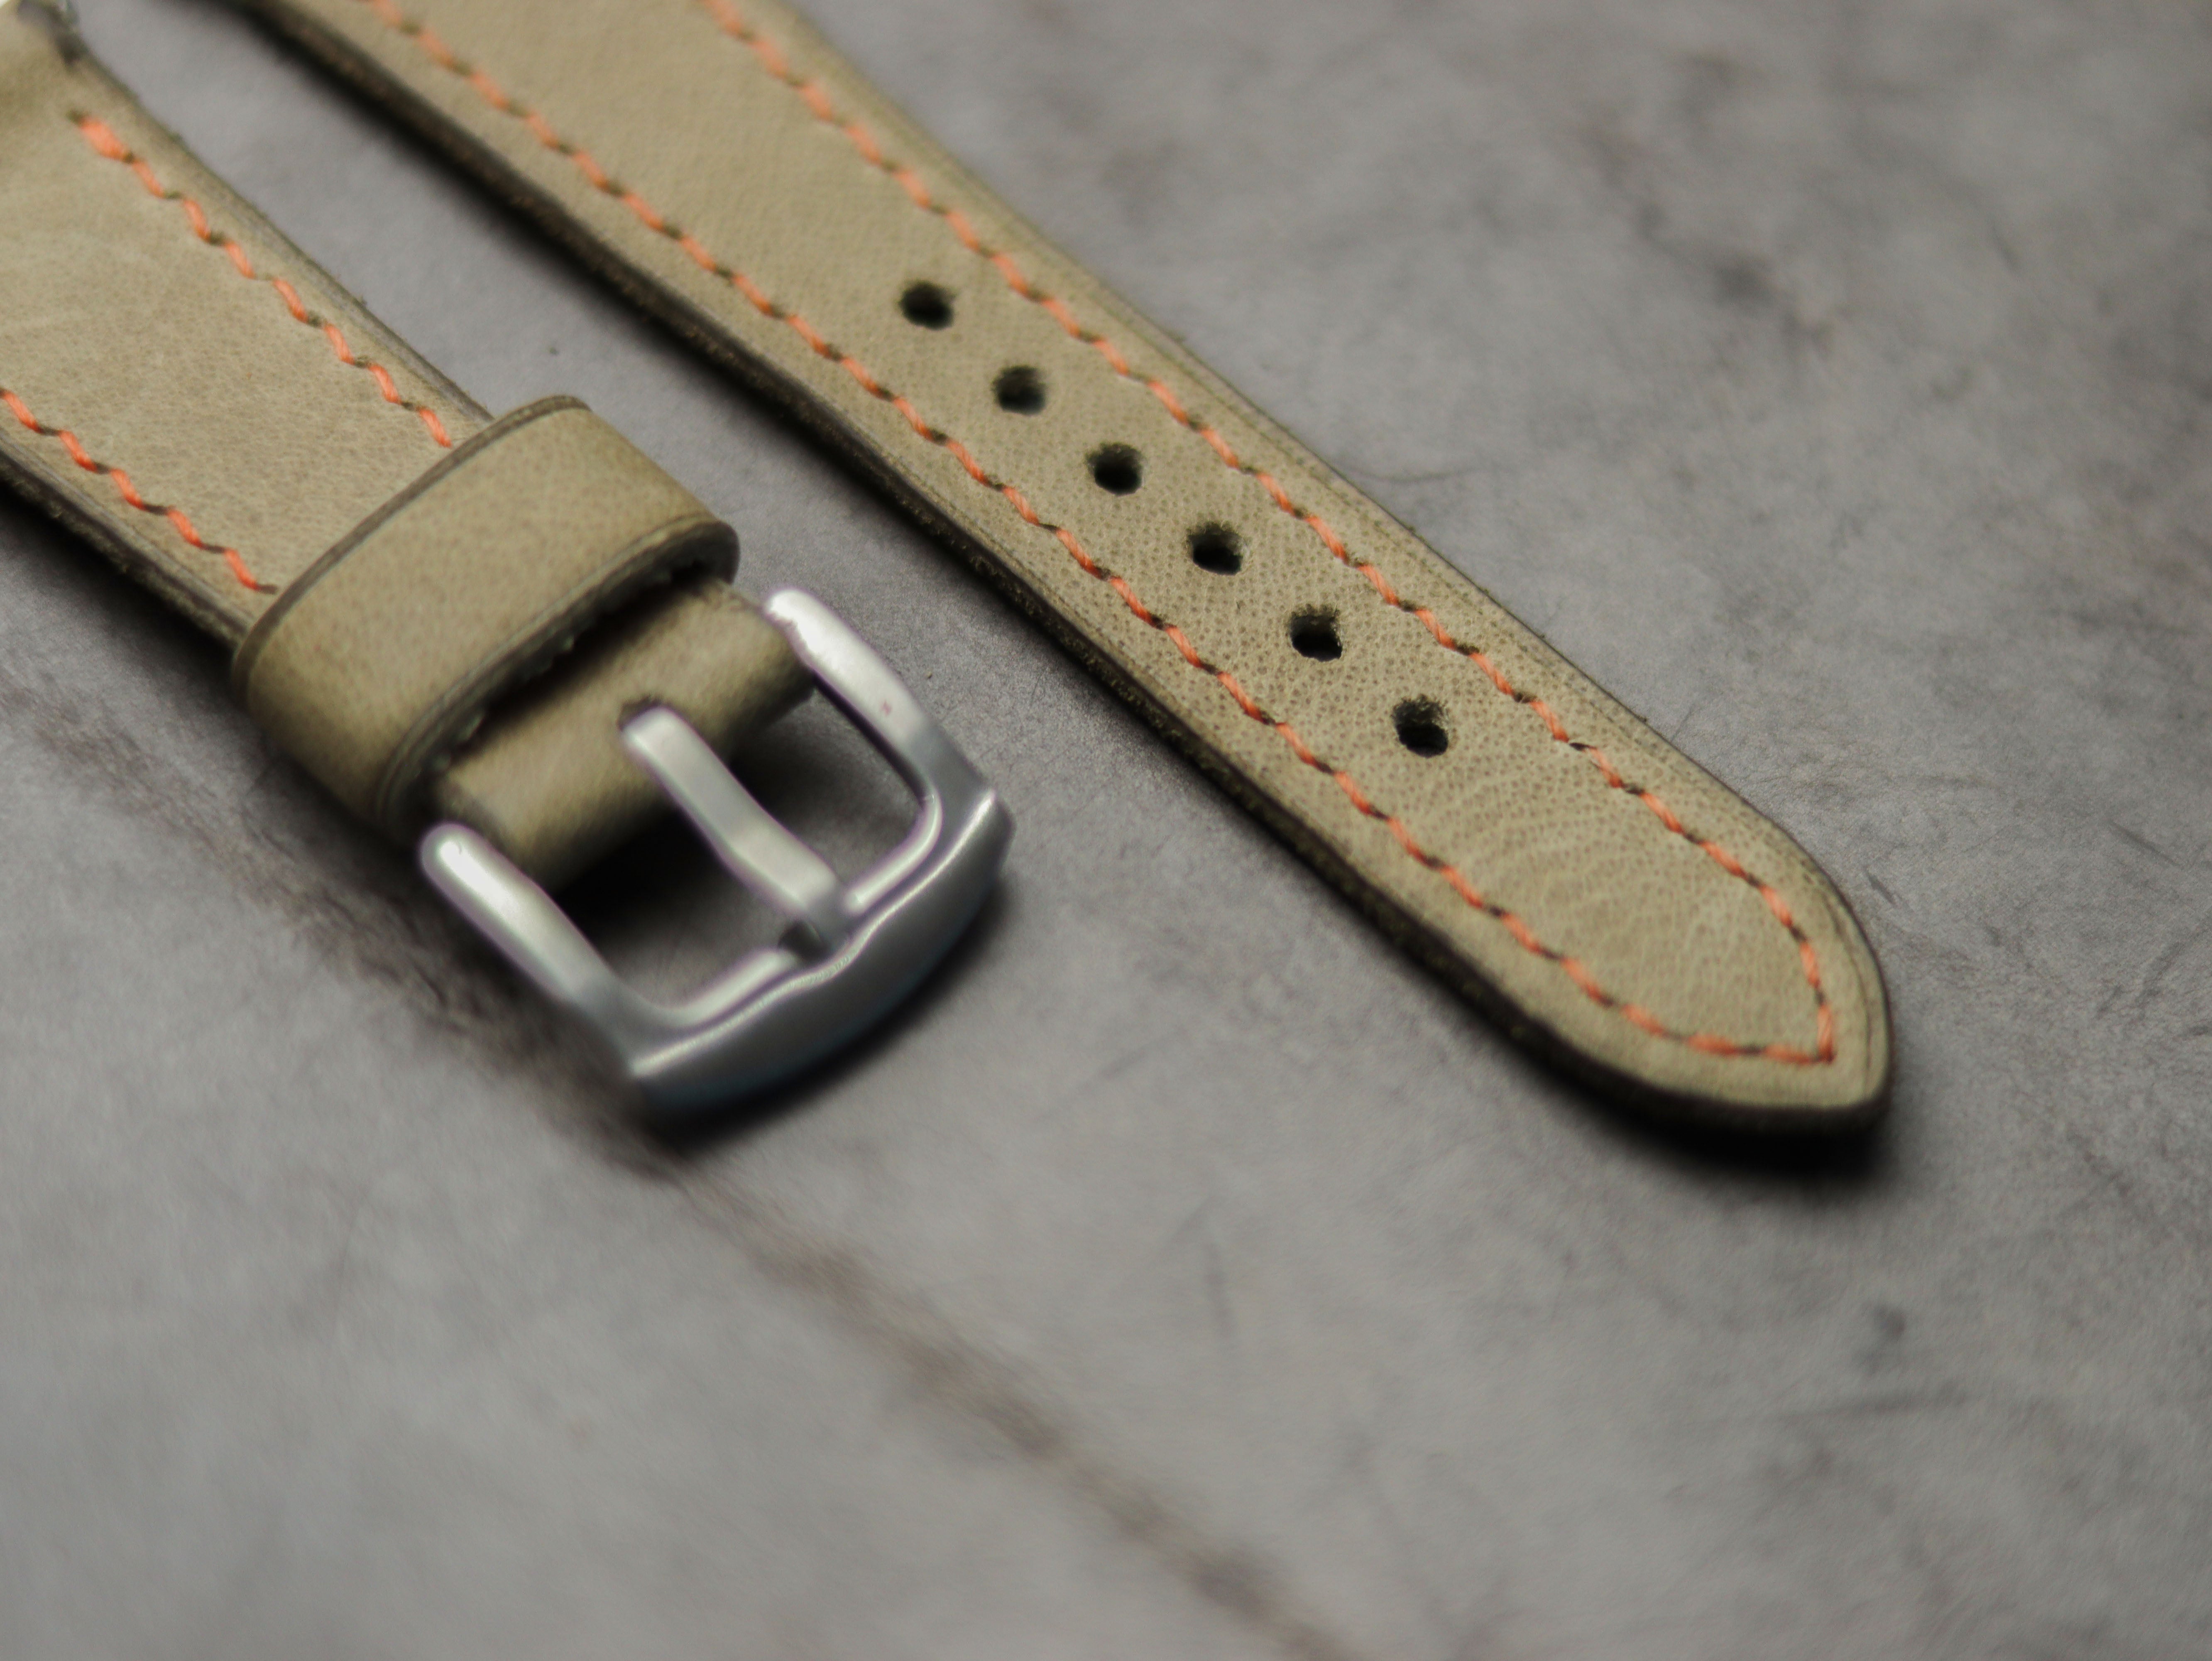 TEA GREEN LEATHER - APPLE WATCH STRAPS HAND-CRAFTED